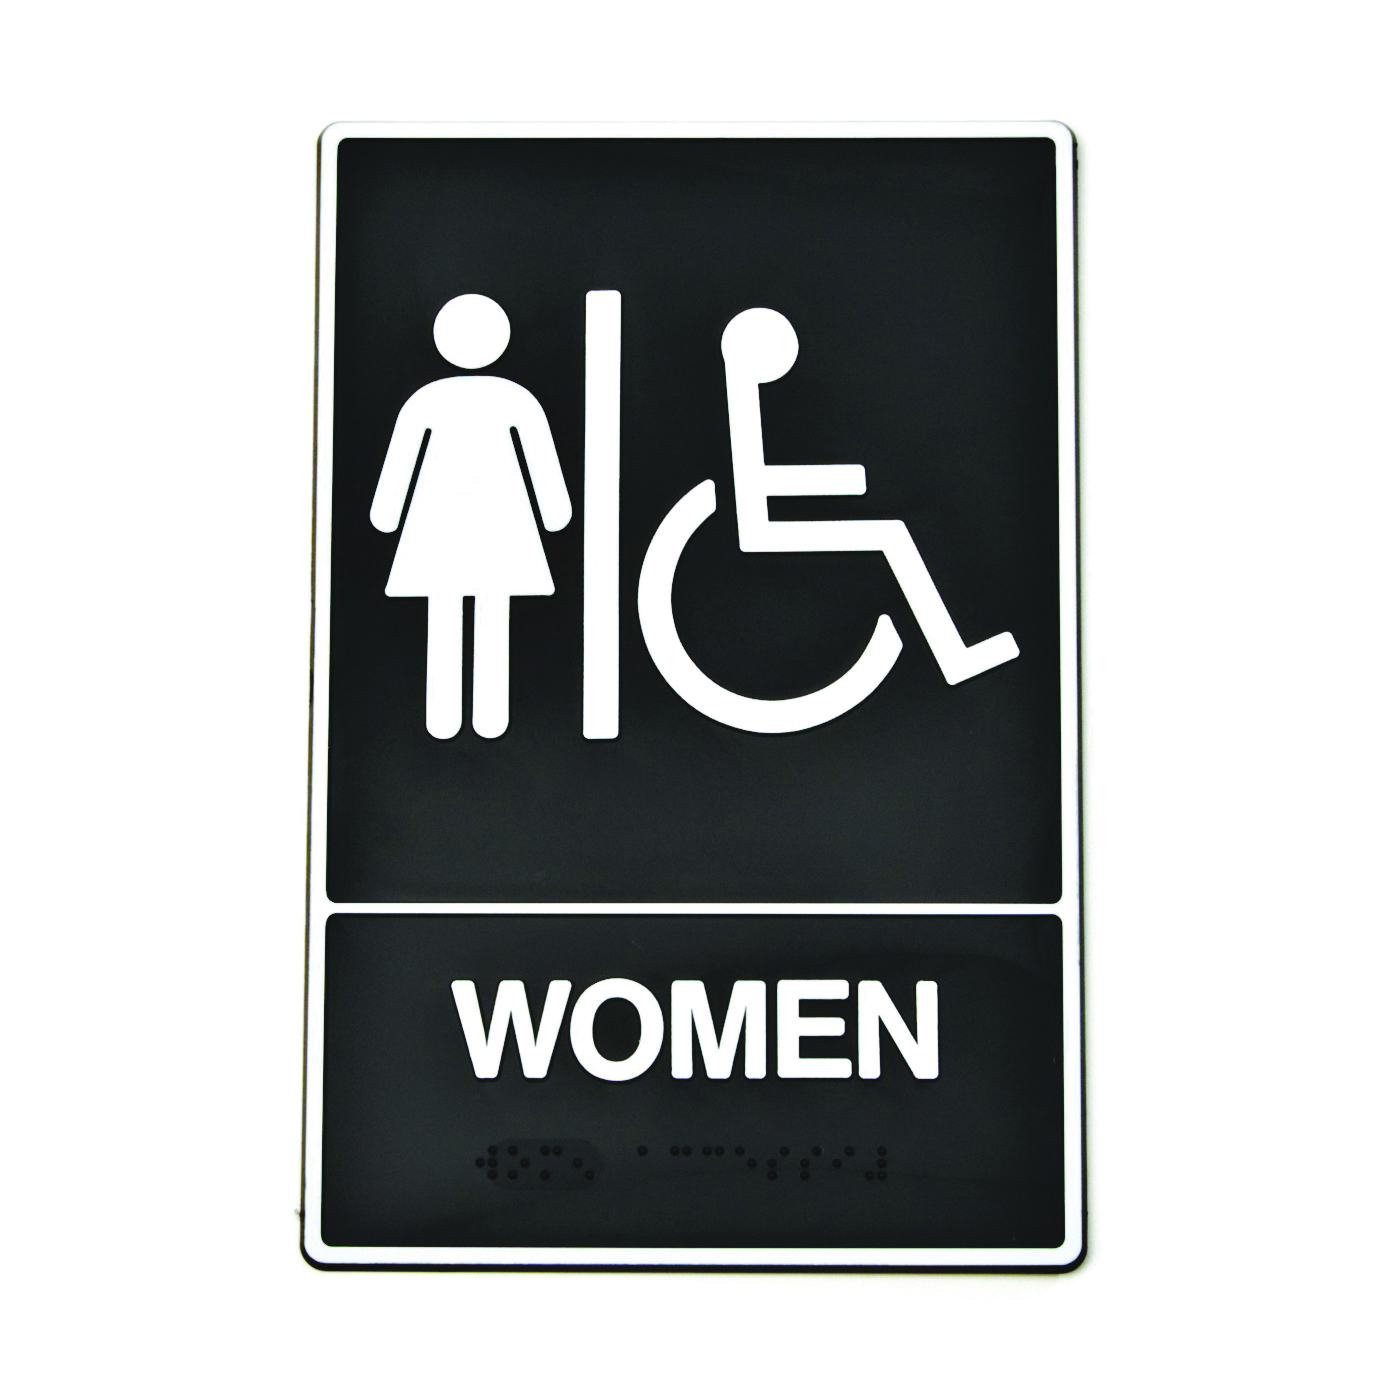 DB-2 Graphic Sign, Rectangular, WOMEN, White Legend, Black Background, Plastic, 6 in W x 9 in H Dimensions